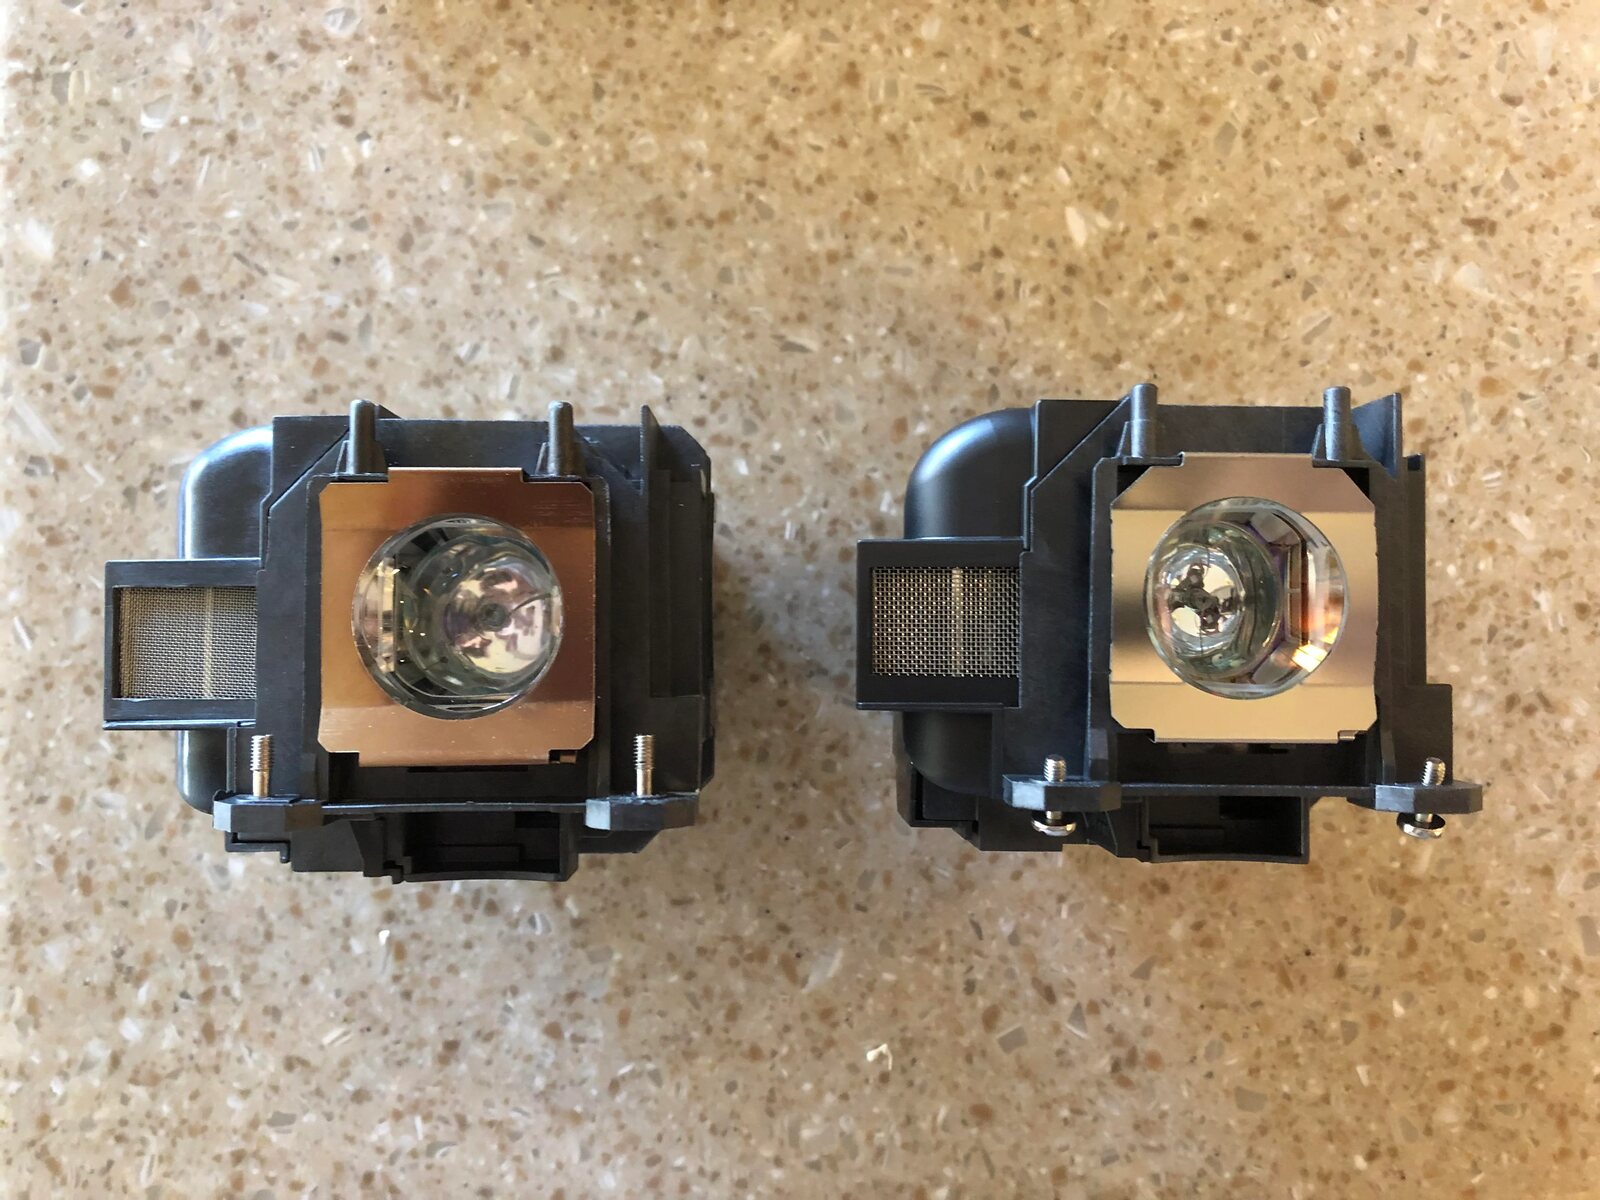 How To Tell If Projector Bulb Is Bad